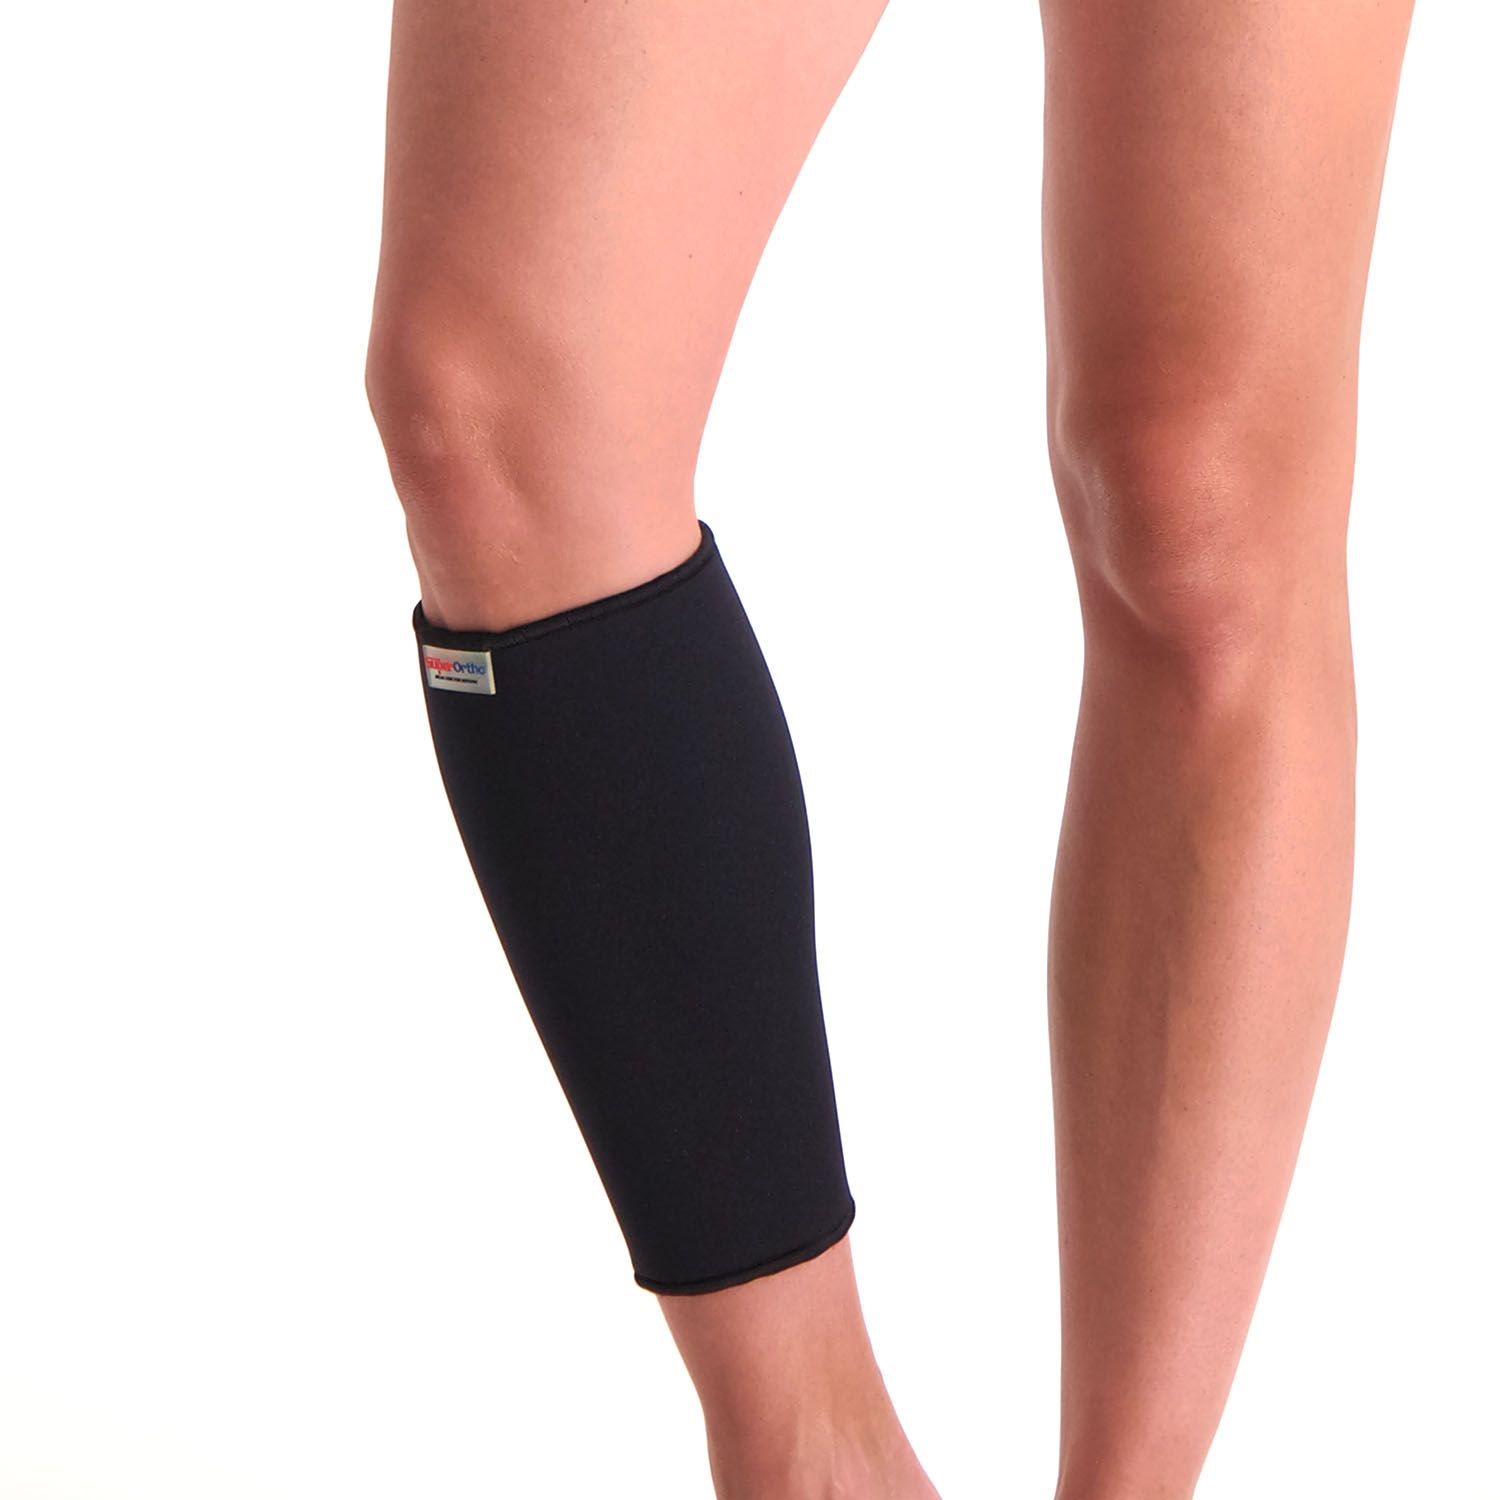 super ortho calf support side view